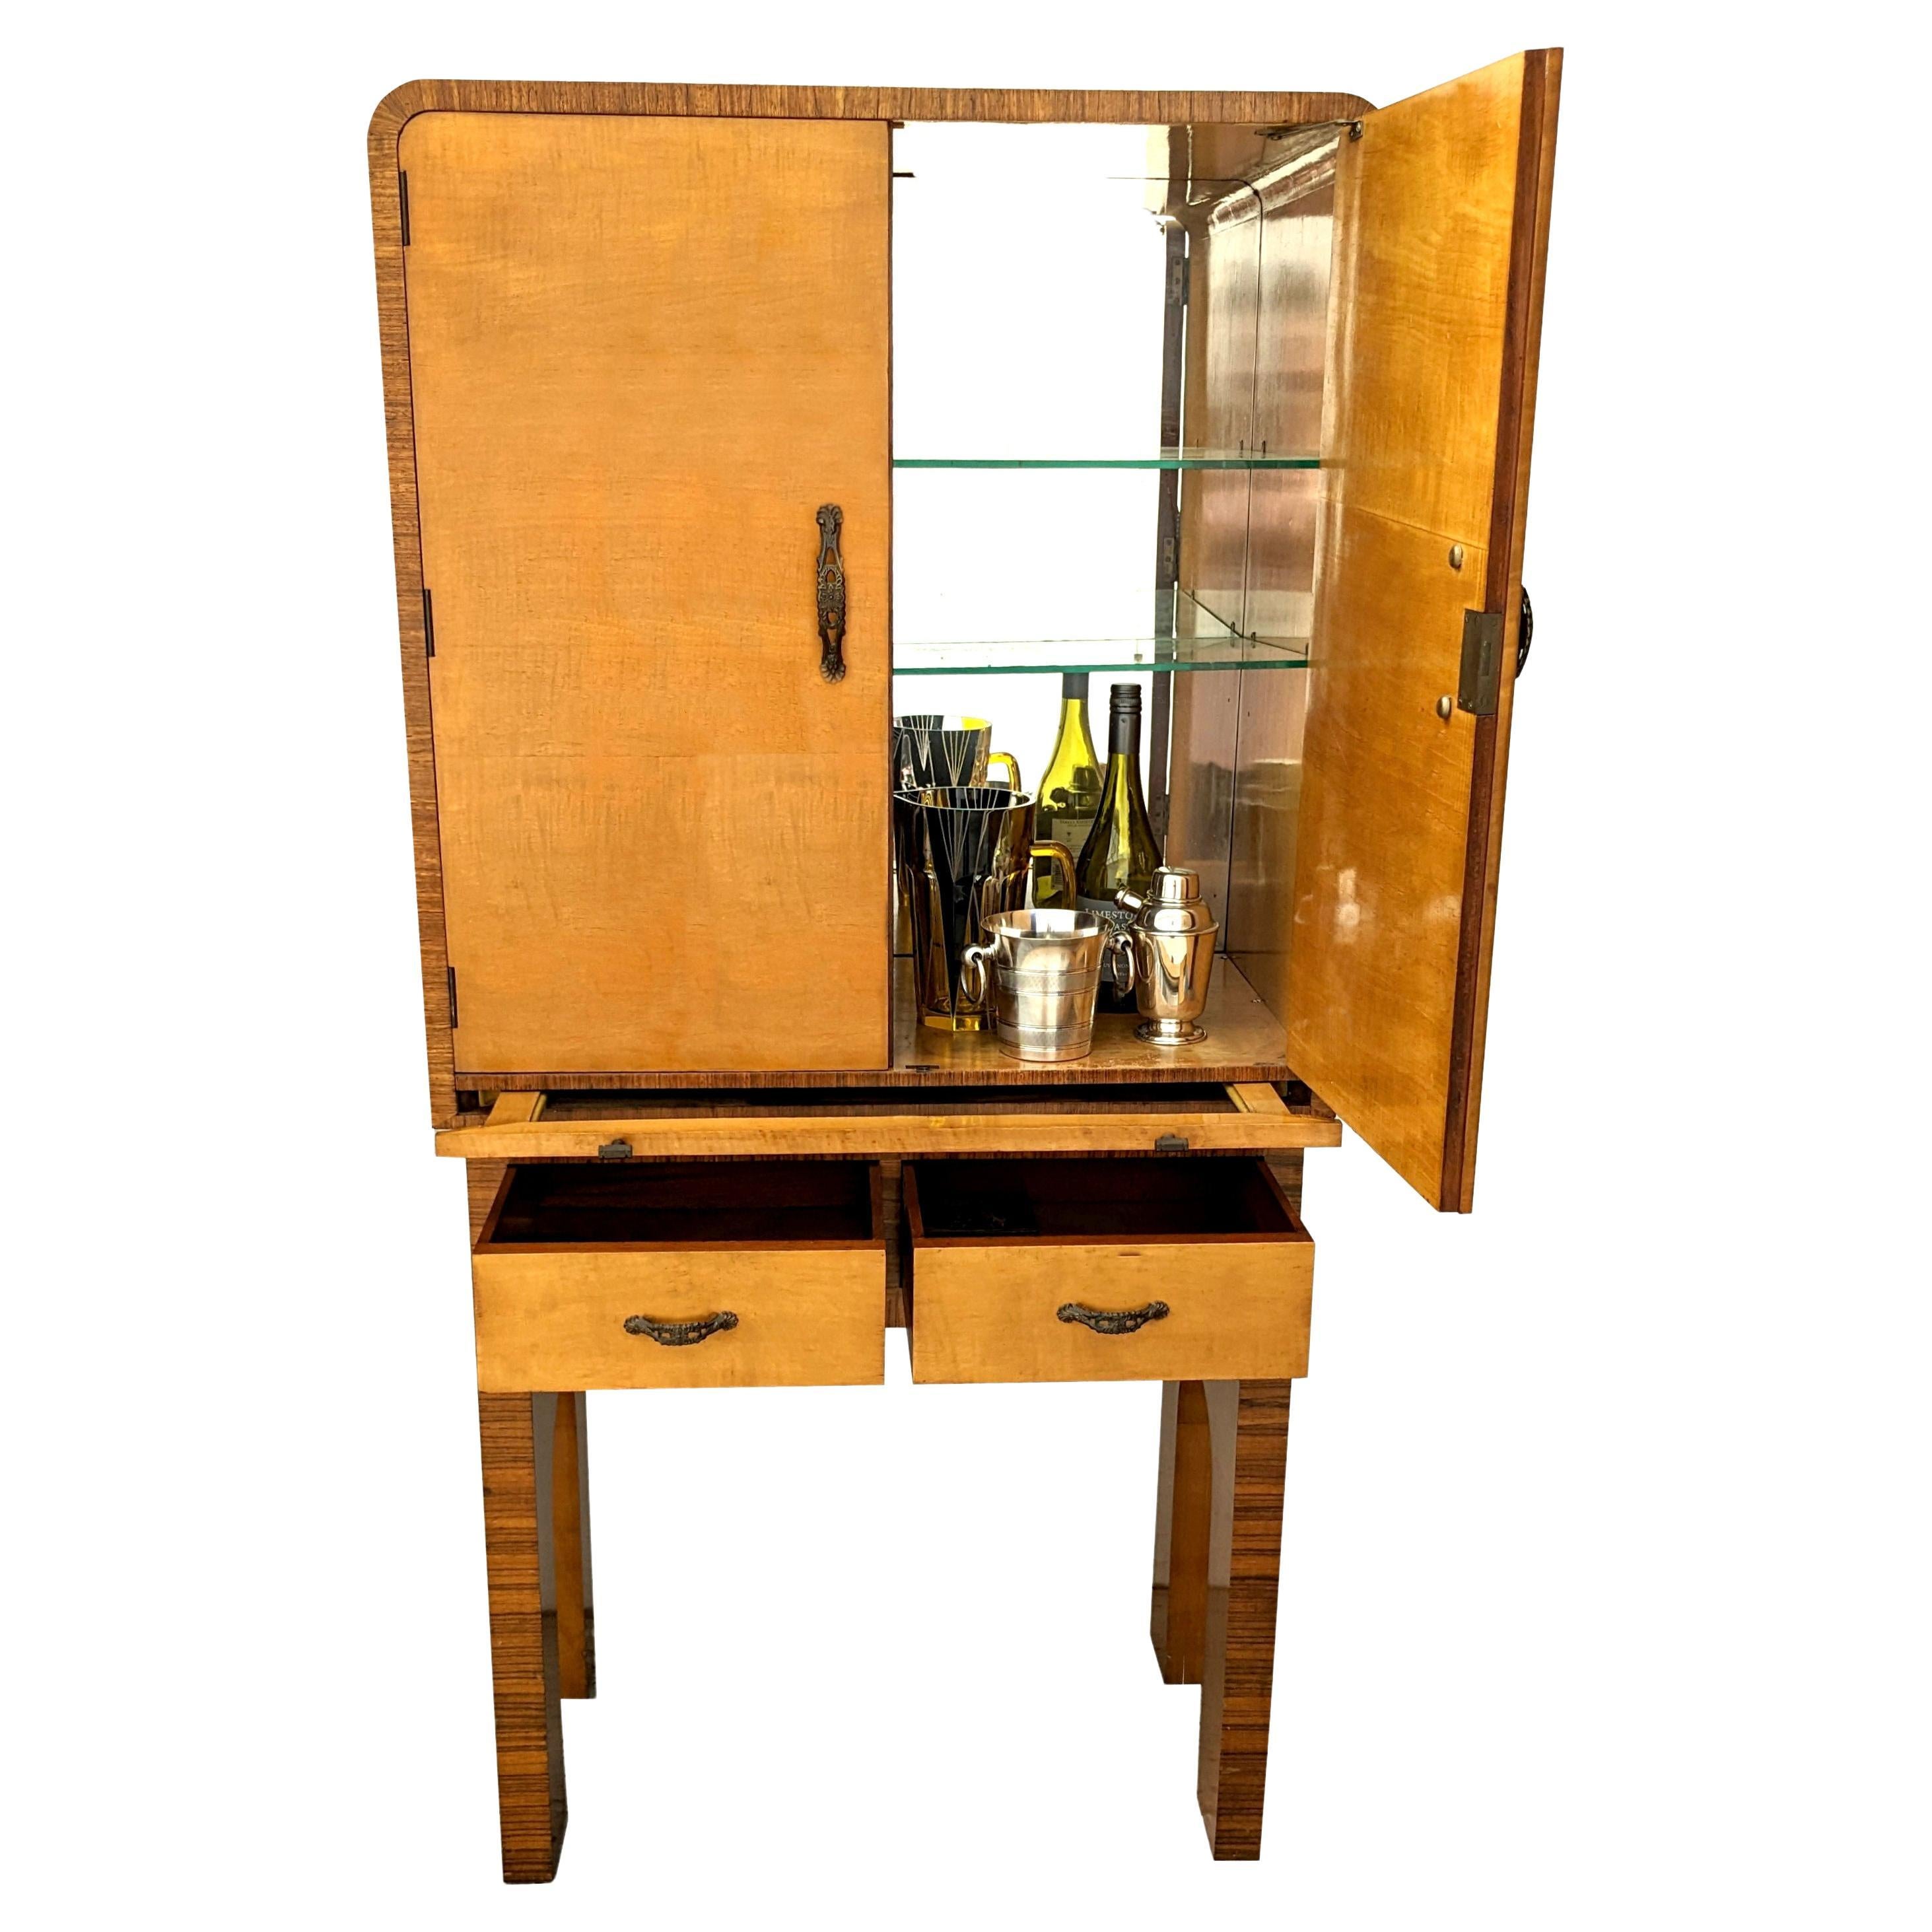 For your consideration is this high end modernist Art Deco Cocktail Cabinet by Harry and Lou Epstein. Dating to the 1930's this cabinet certainly would not have been in your average home. Most of Epstein's furniture were custom made using only the